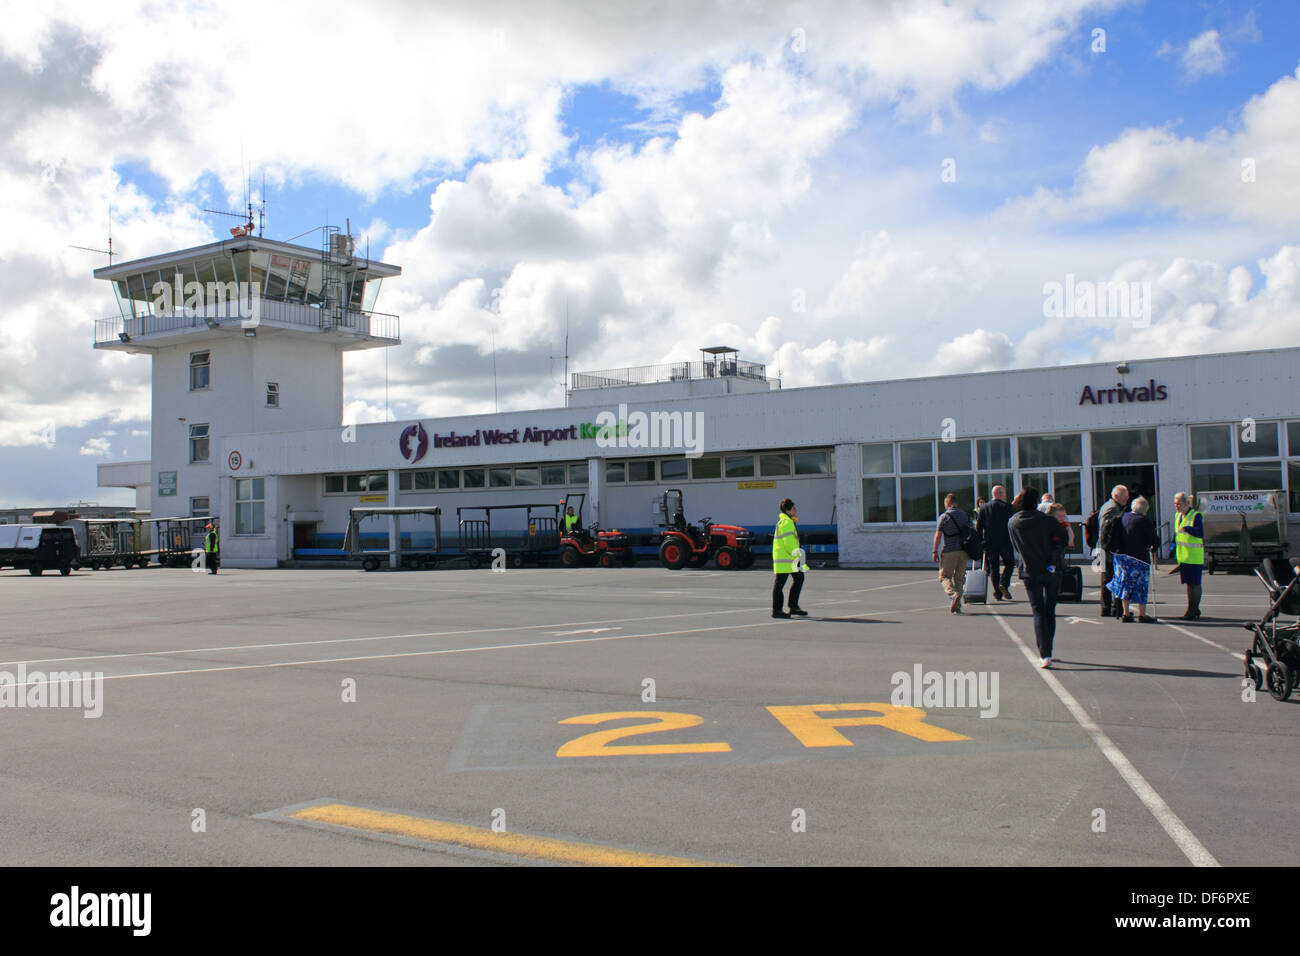 Ireland West Airport Knock is 5.6km south-west of Charlestown, County Mayo, Ireland. Stock Photo